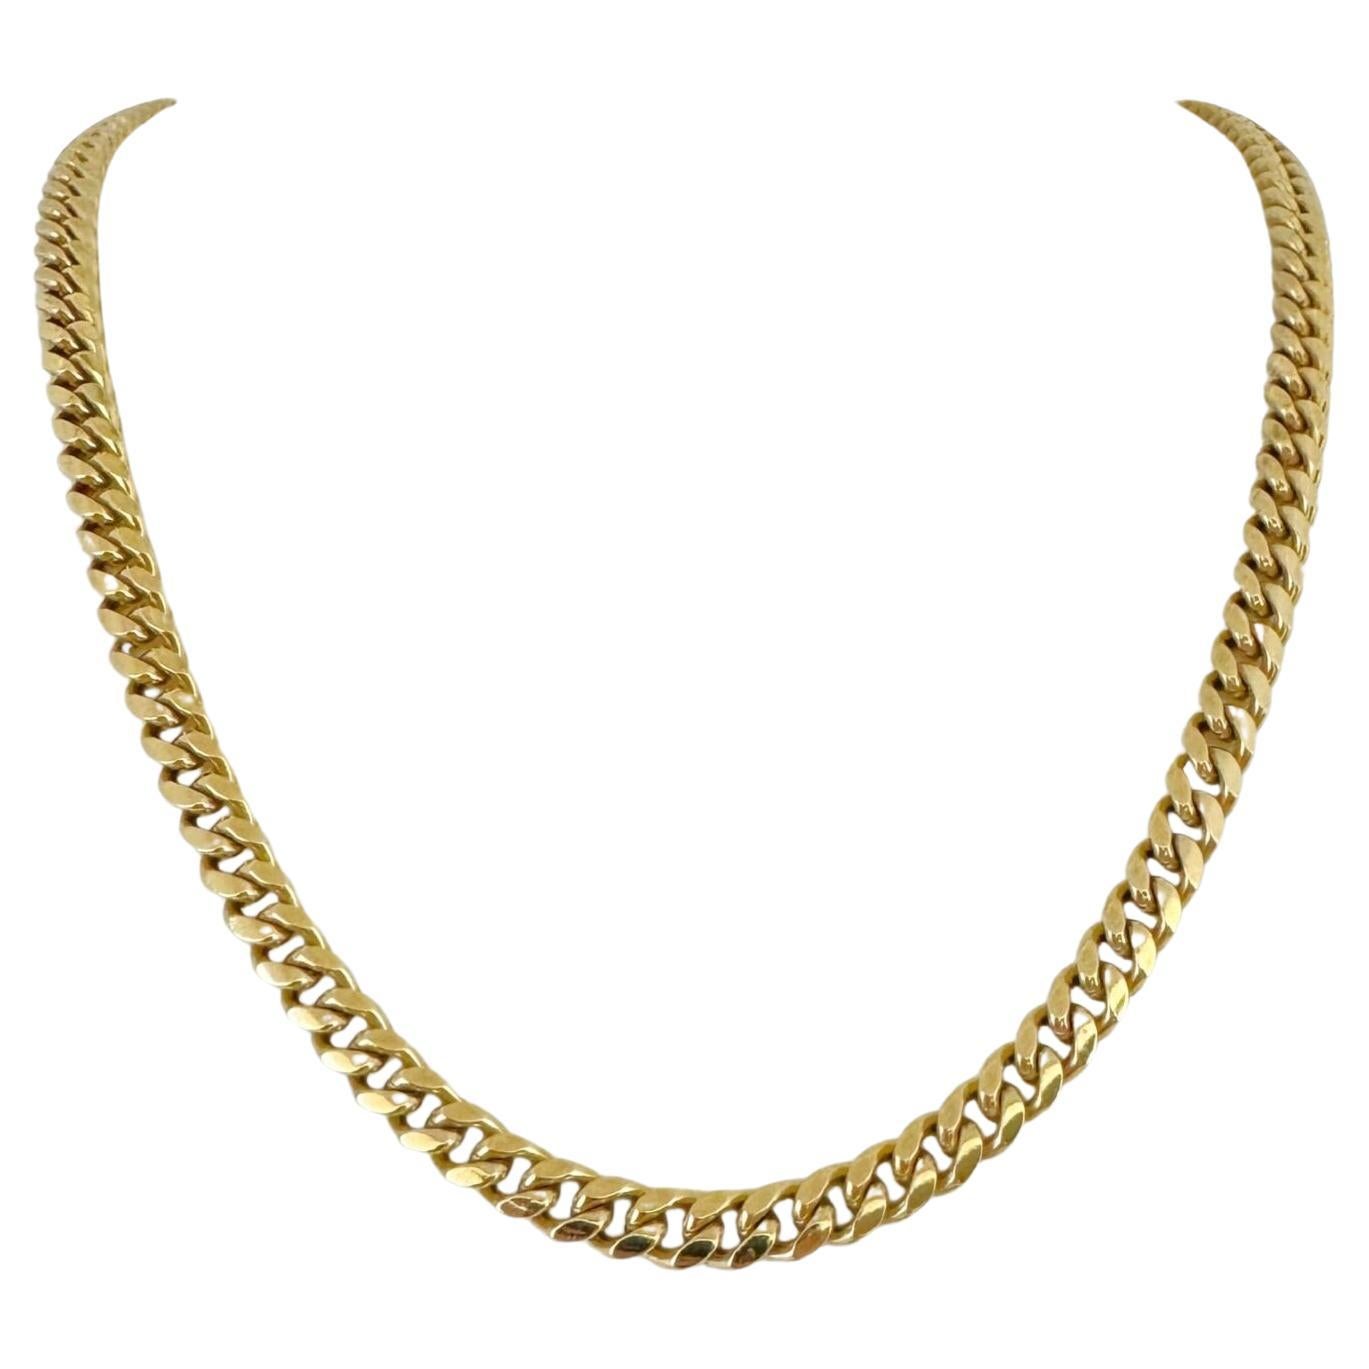 10 Karat Yellow Gold Solid Heavy Cuban Curb Link Chain Necklace